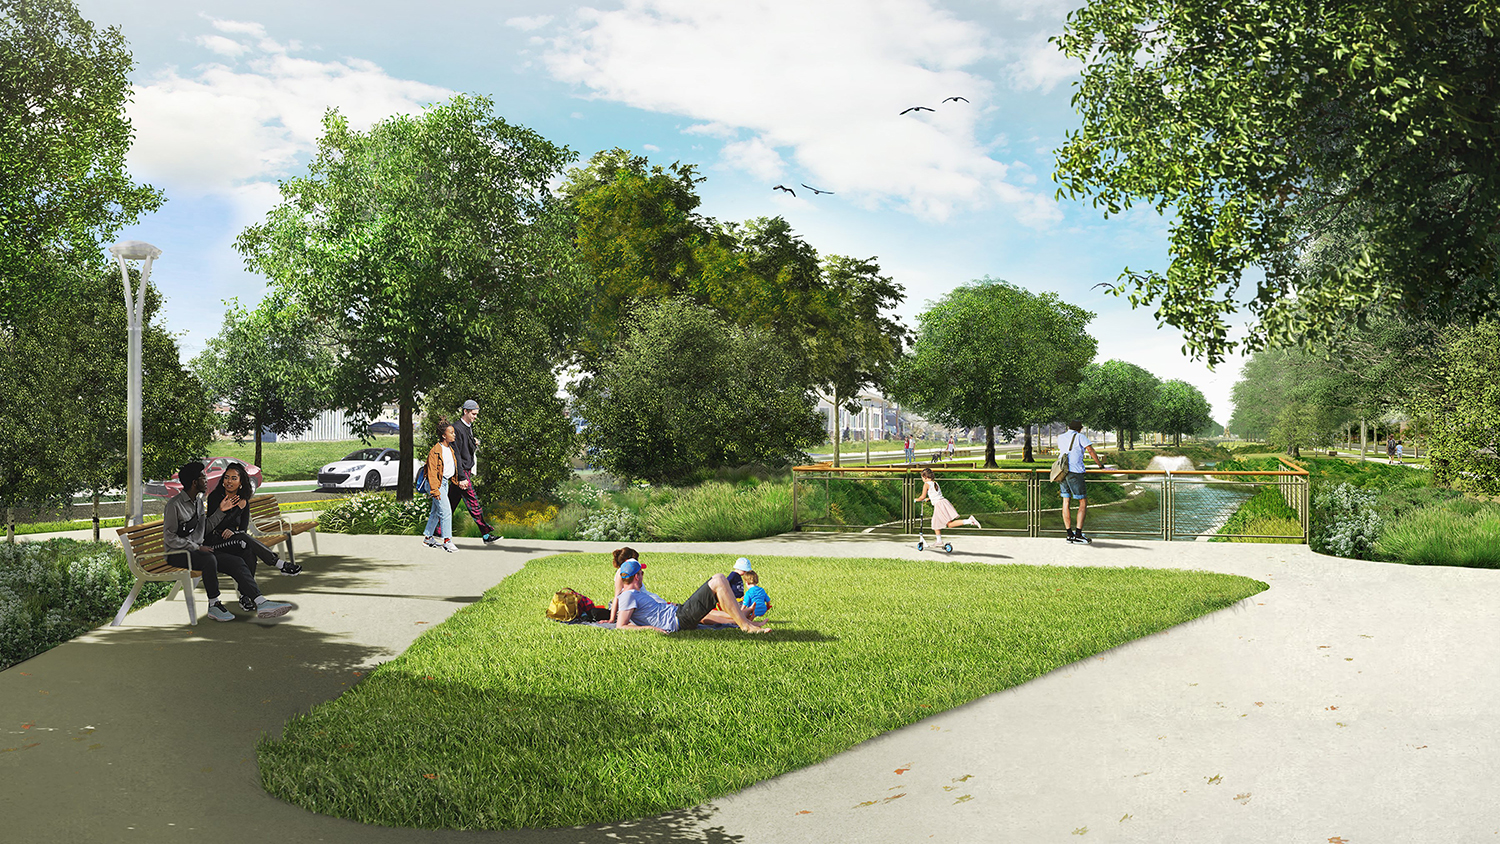 The Blue and Green Corridors Project is located in the Gentilly Neighborhood of New Orleans